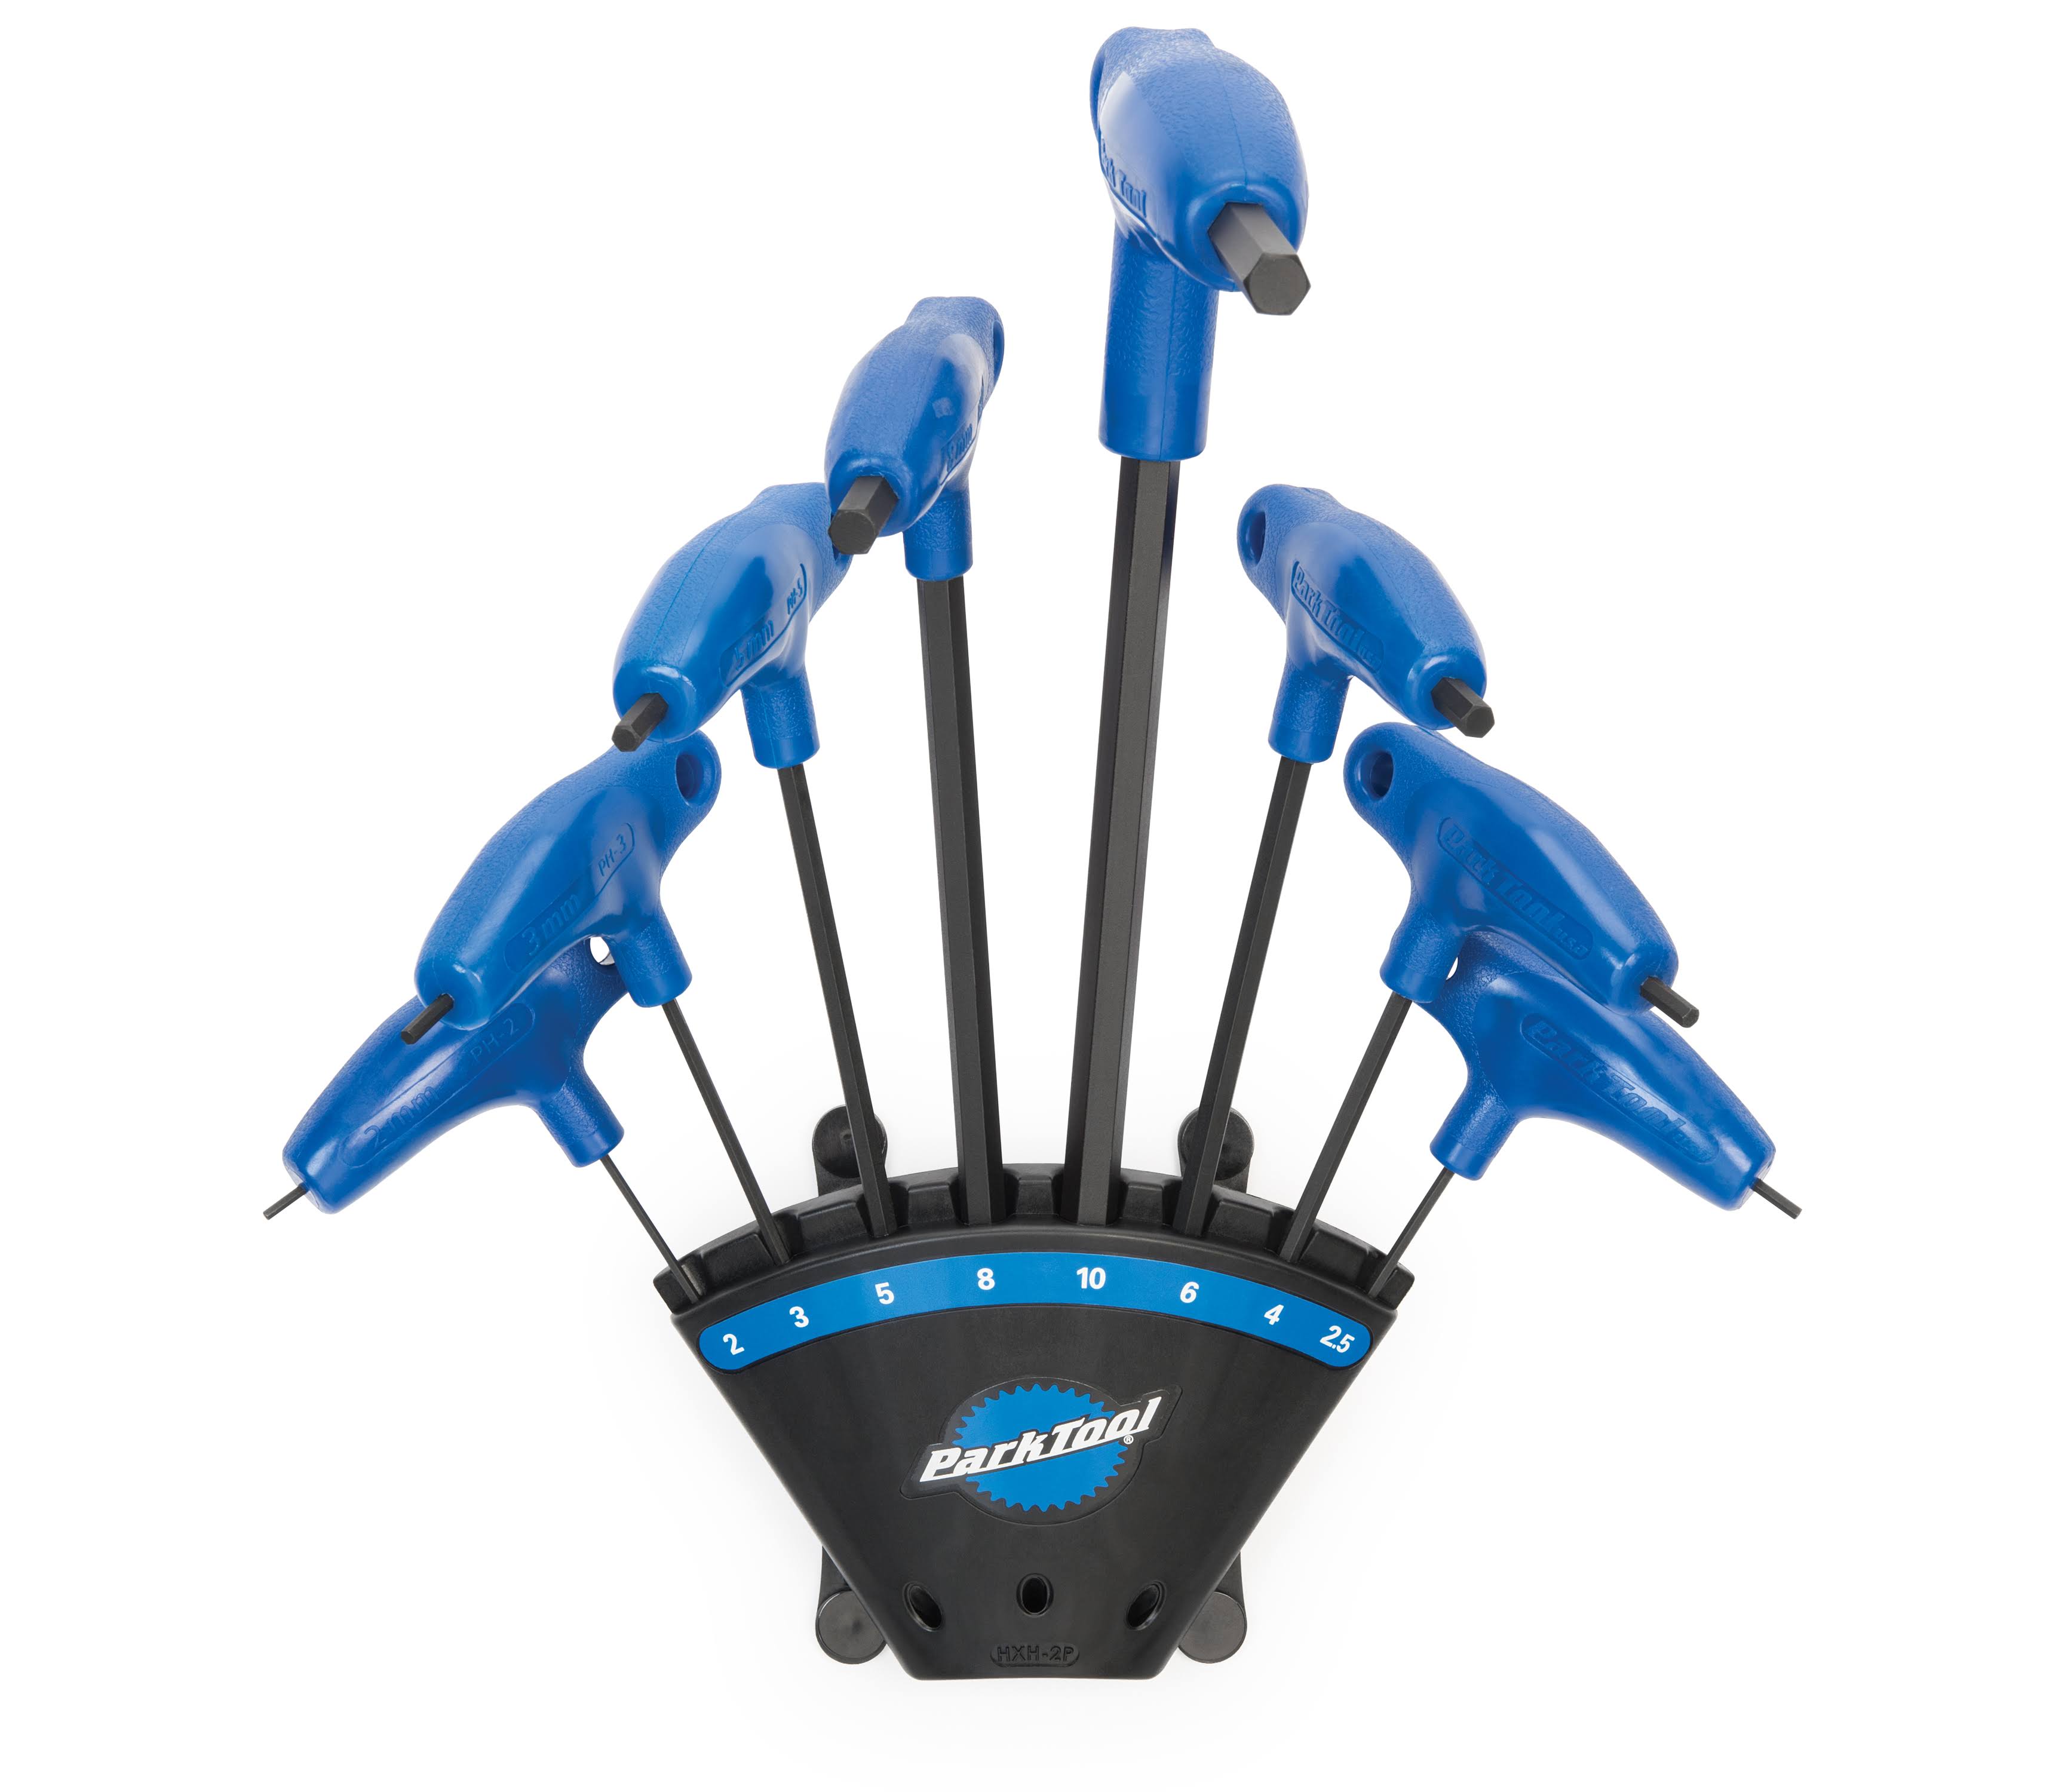 Park Tool Cycling Handled Hex with Holder Wrench Set - Blue/Black